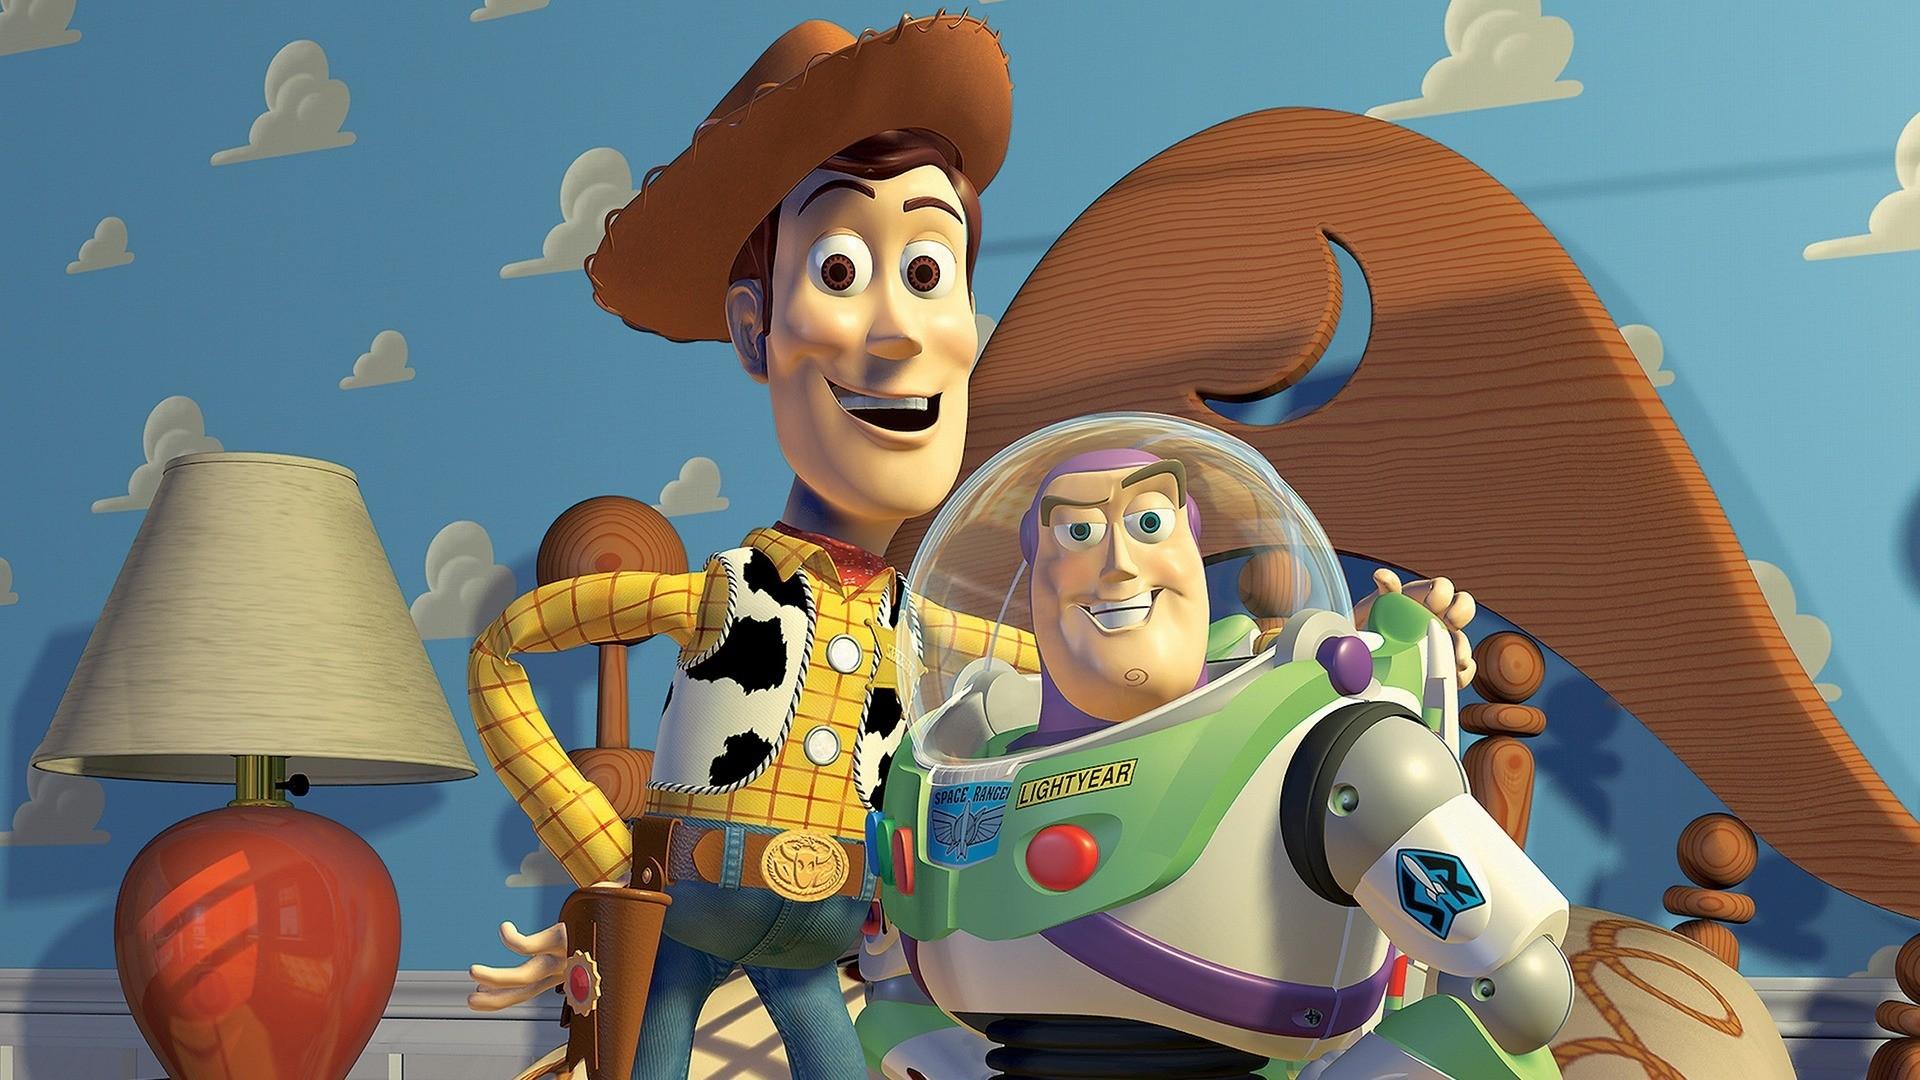 TOY STORY ANIMATED MOVIE WALLPAPERS